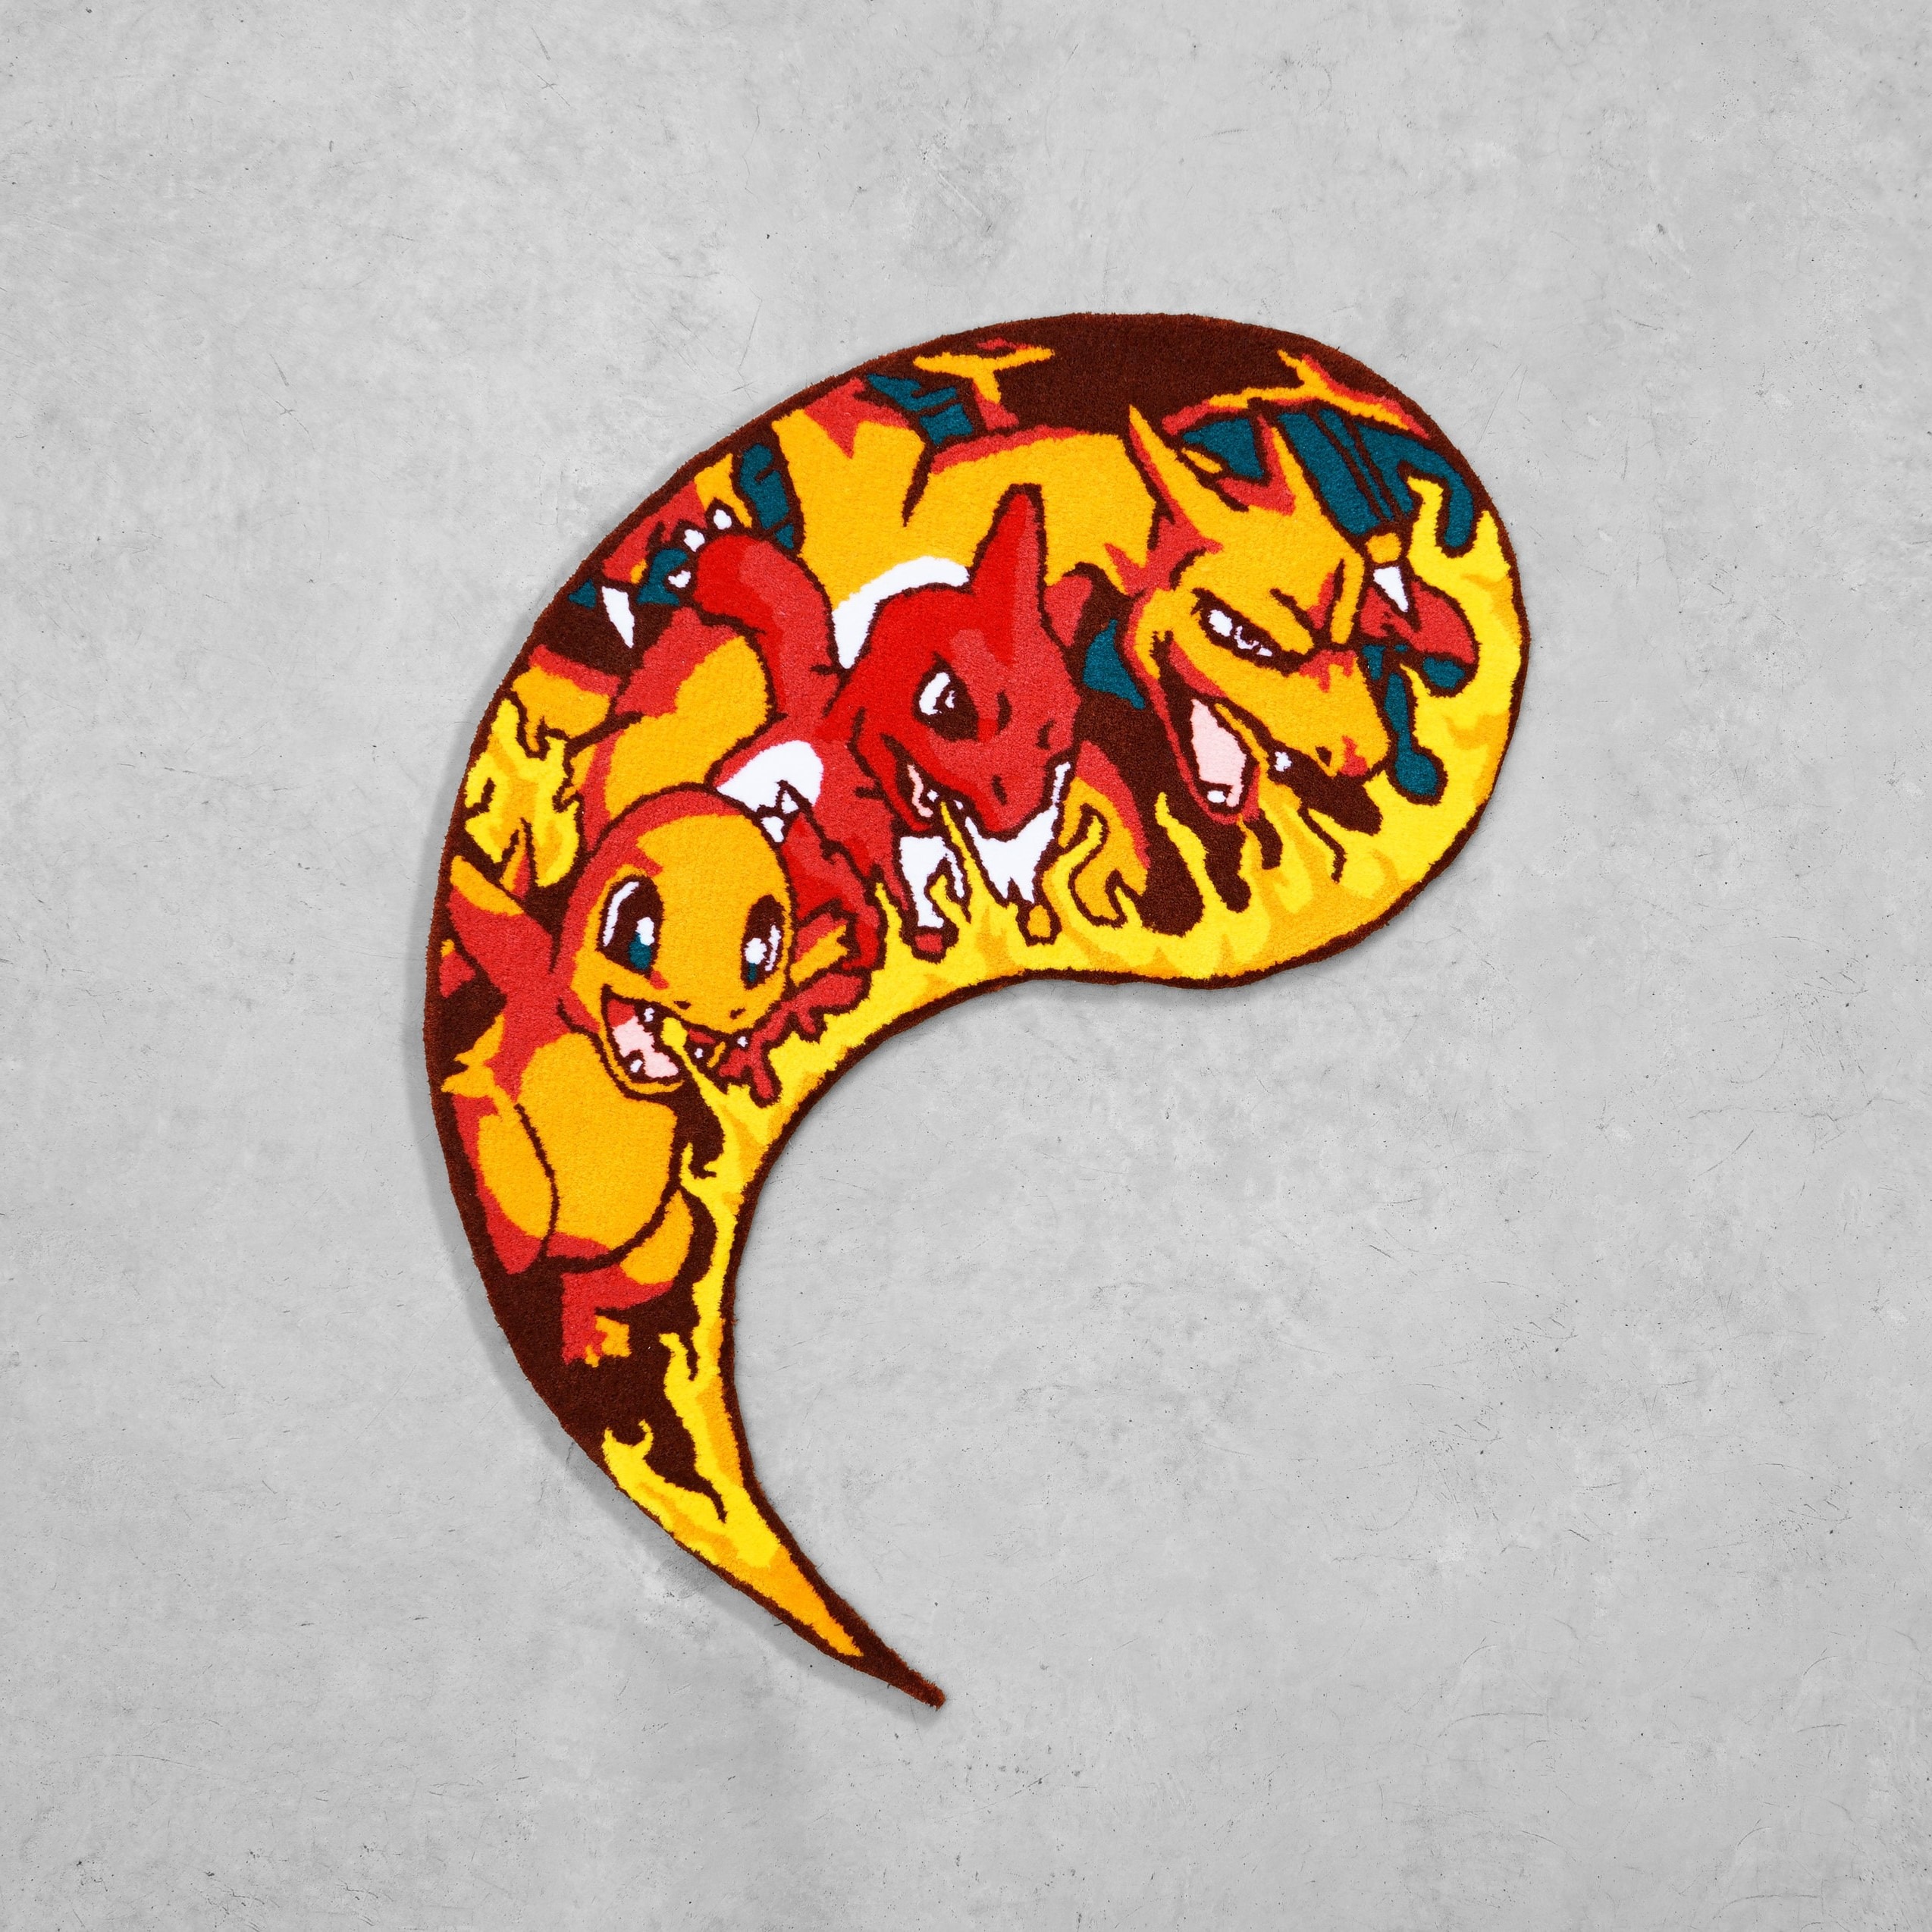 YINYANG CHARIZARD SPECIAL EDITION